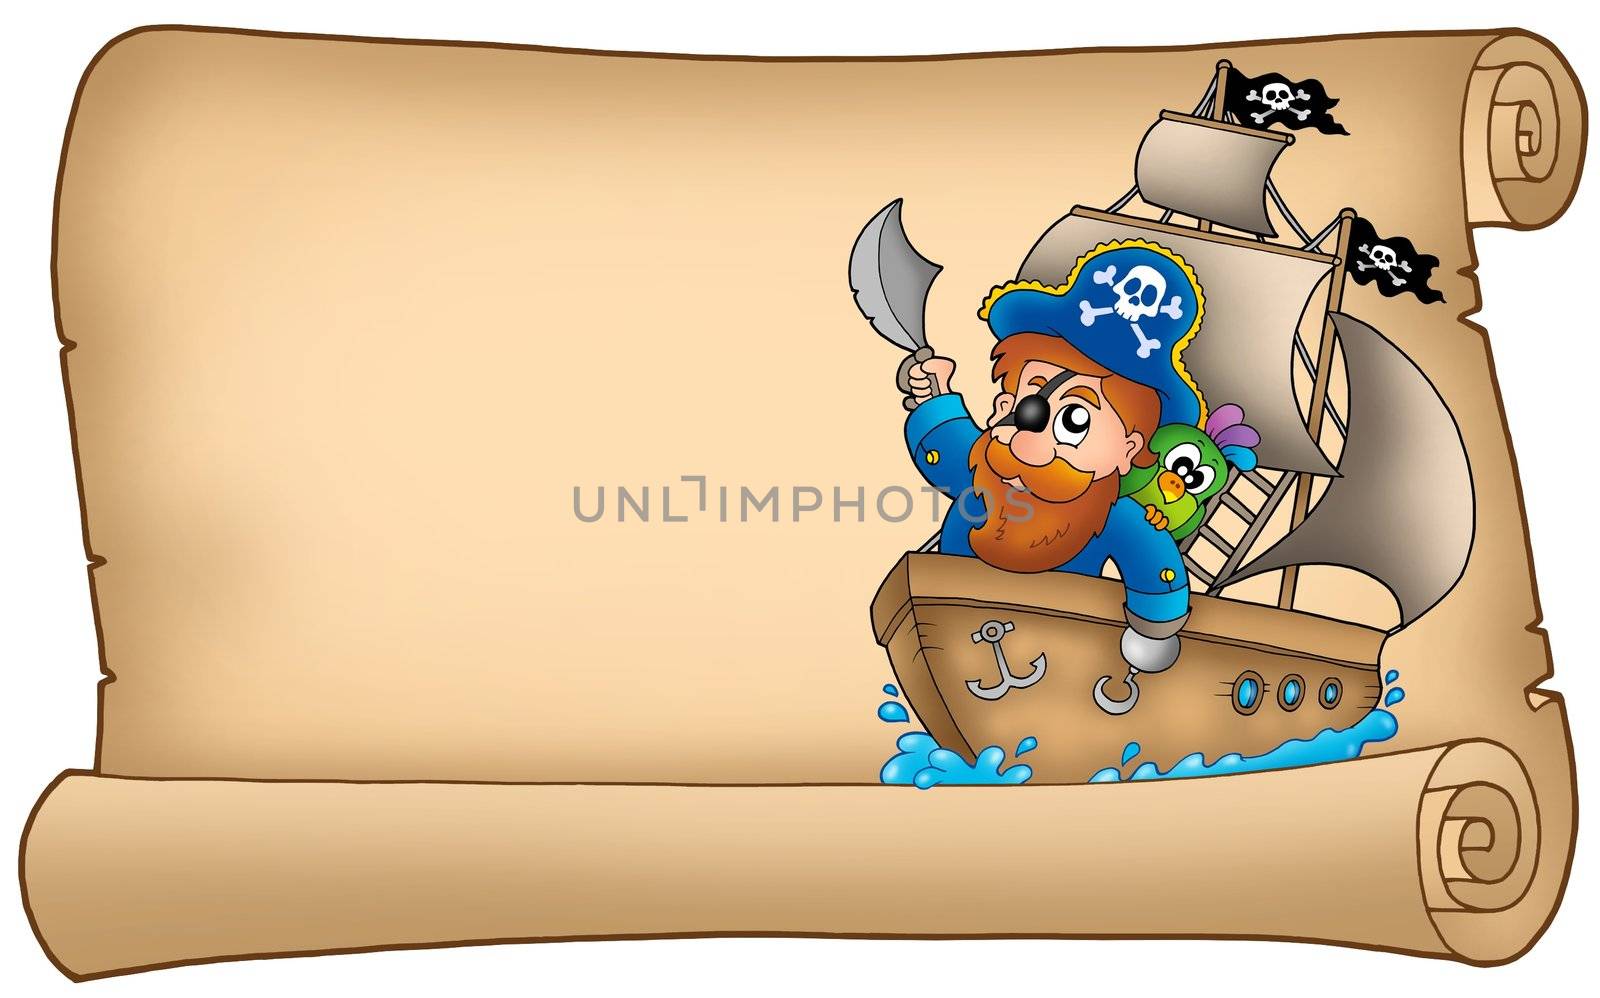 Old parchment with pirate sailing on ship by clairev